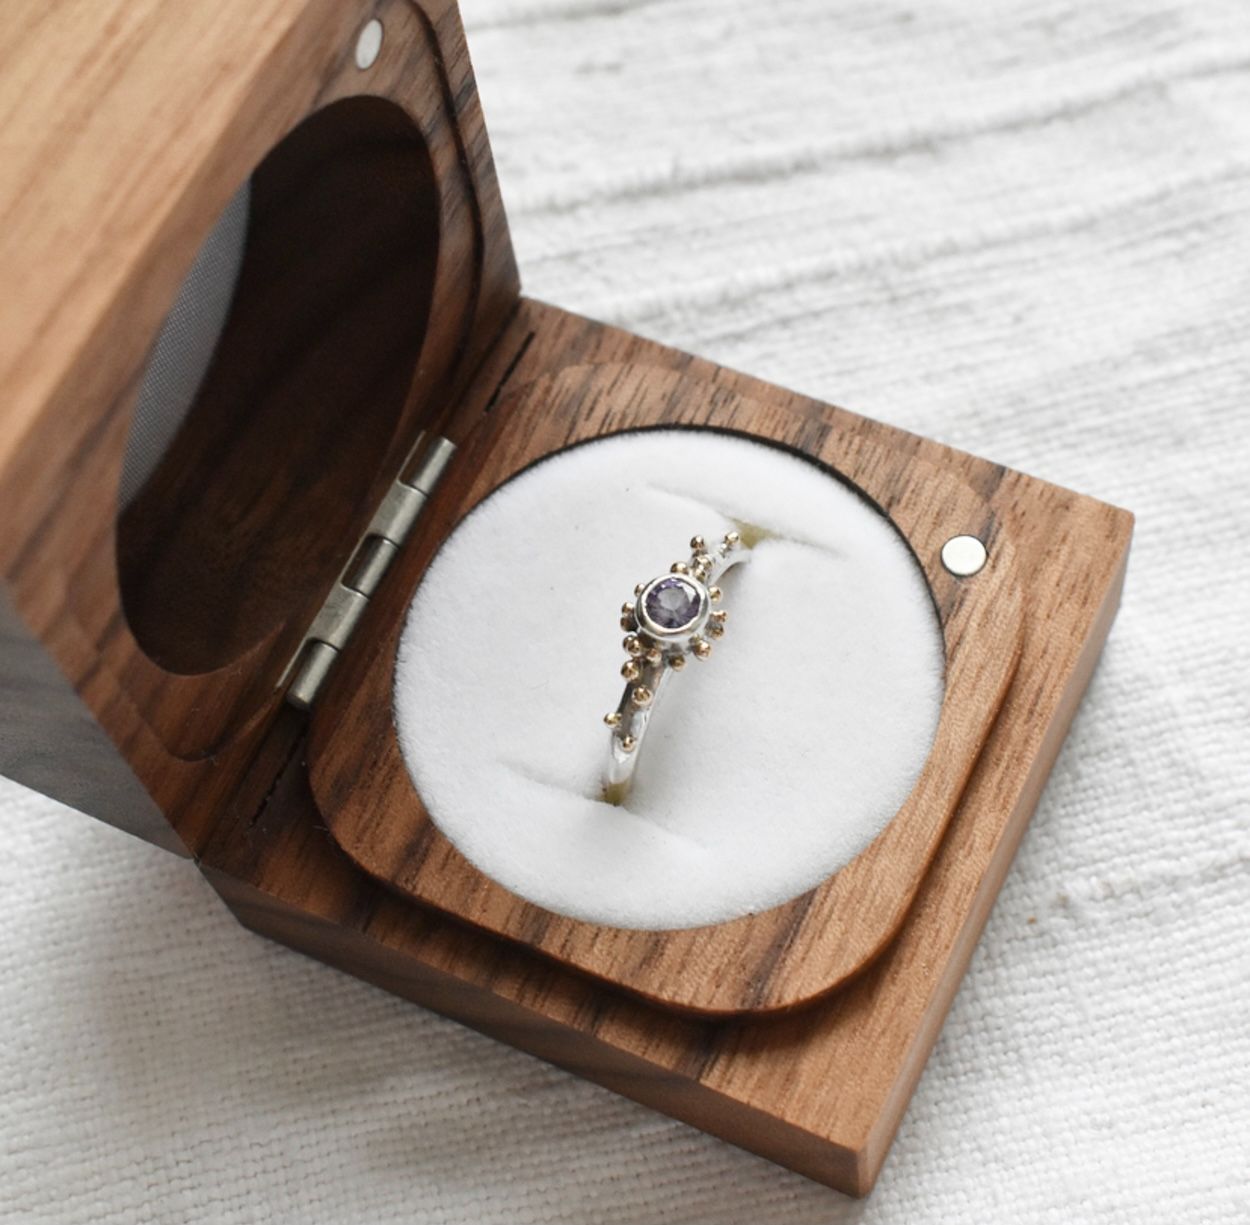 susatainable wooden ring box  with handmade bespoke ring by Vicky Callender Jewellery